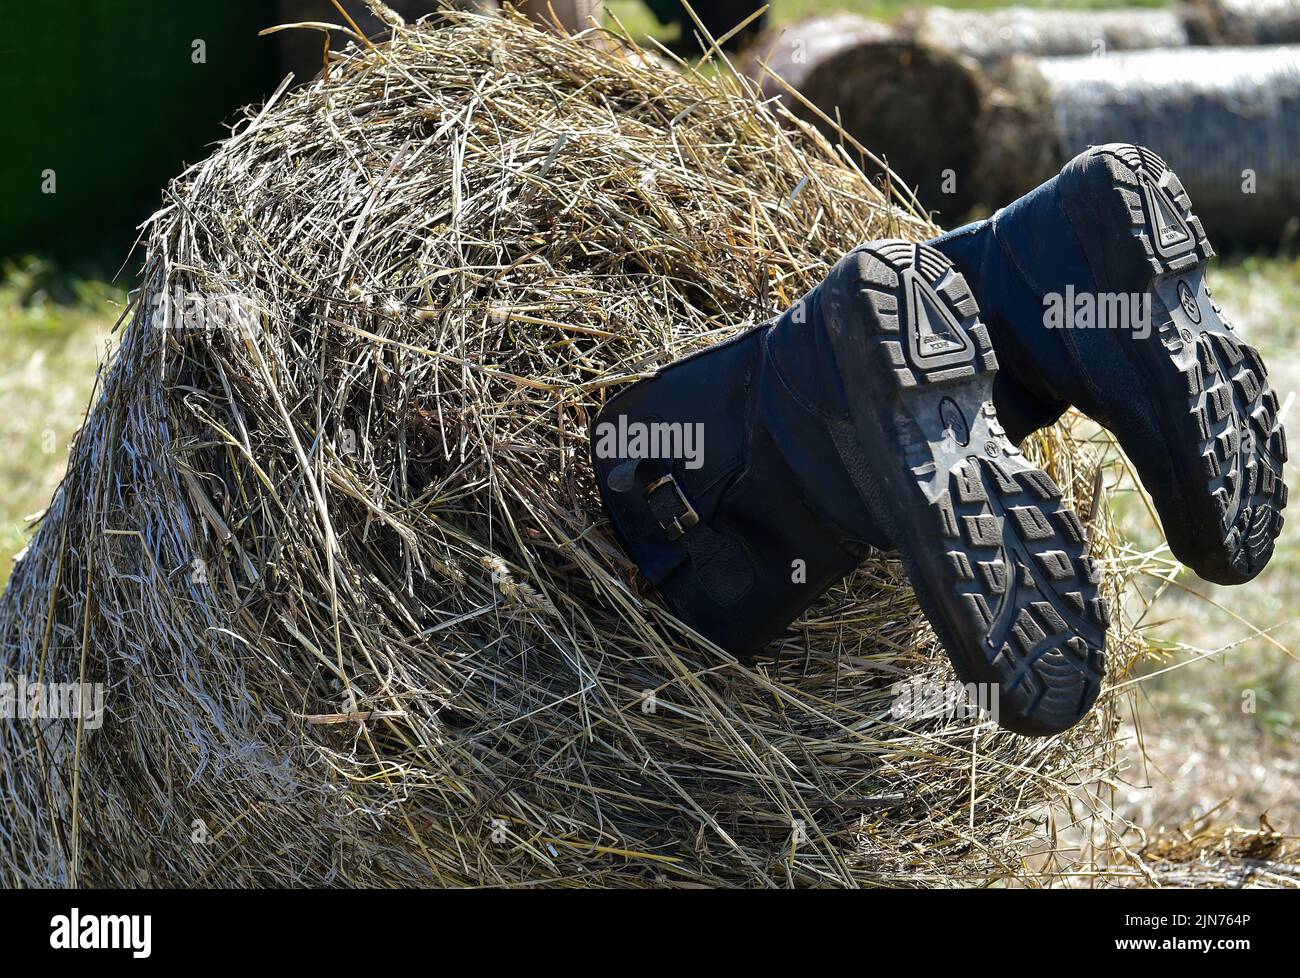 Regional demonstration site of modern technologies in agricultural production 'Field Day 2022' in Novosibirsk. Genre photography. Installation with rubber boots and a haystack. 05.08.2022 Russia, Novosibirsk Photo credit: Vlad Nekrasov/Kommersant/Sipa USA Stock Photo